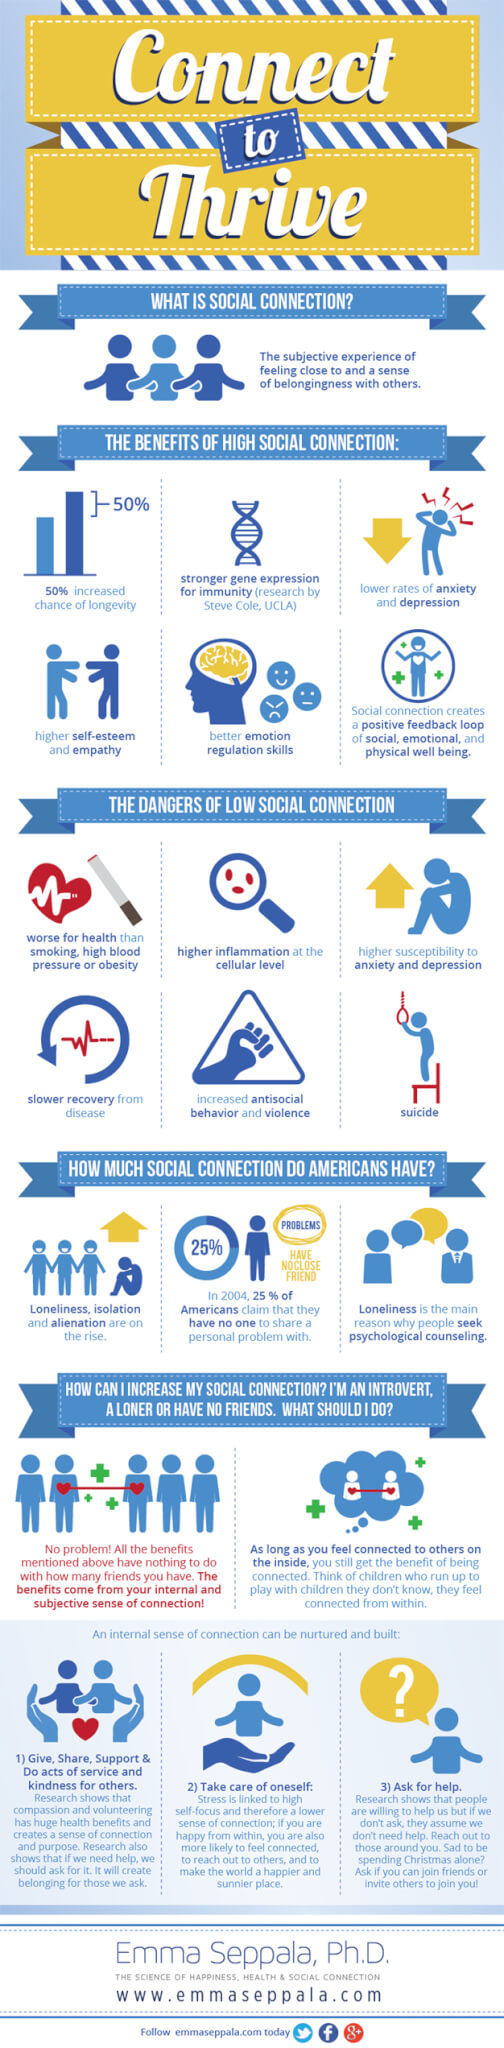 Connect to Thrive infographic about "What is Social Connection?" and the value of community connections.